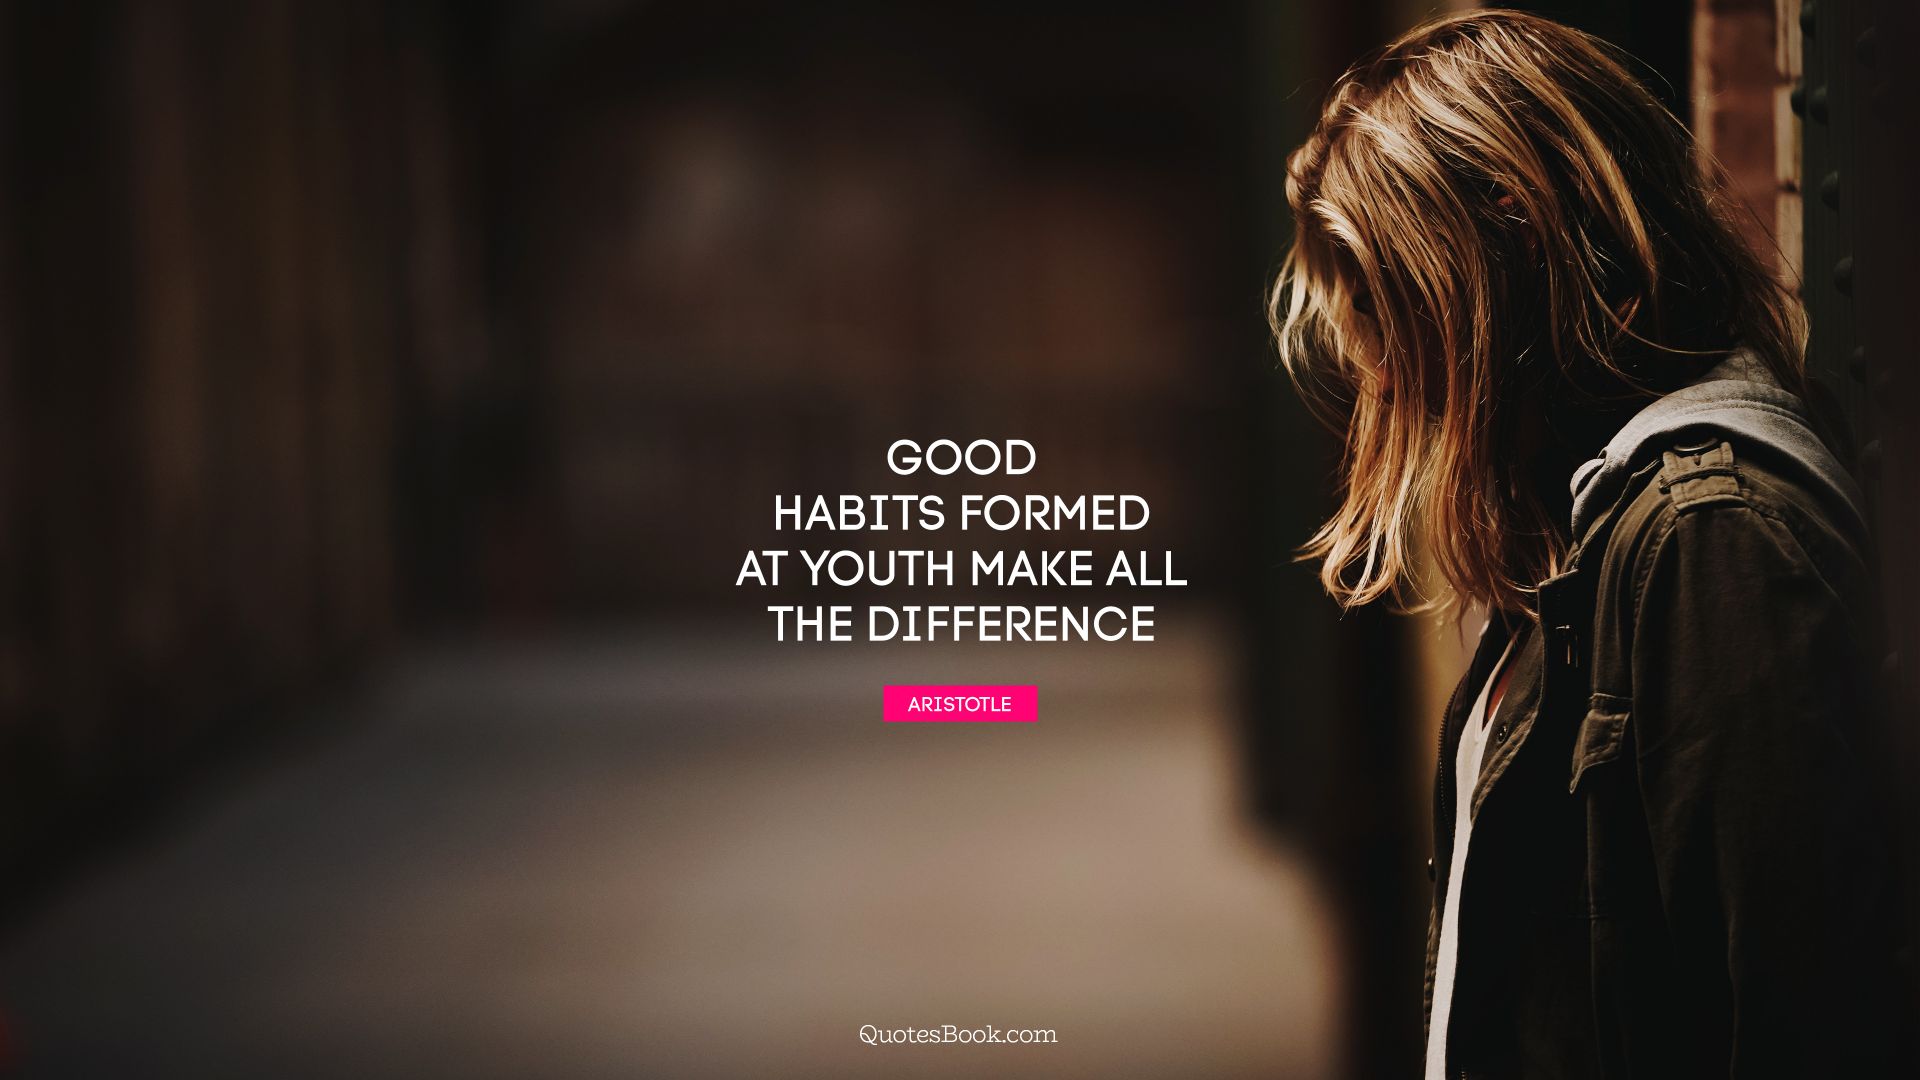 Good habits formed at youth make all the difference. - Quote by Aristotle